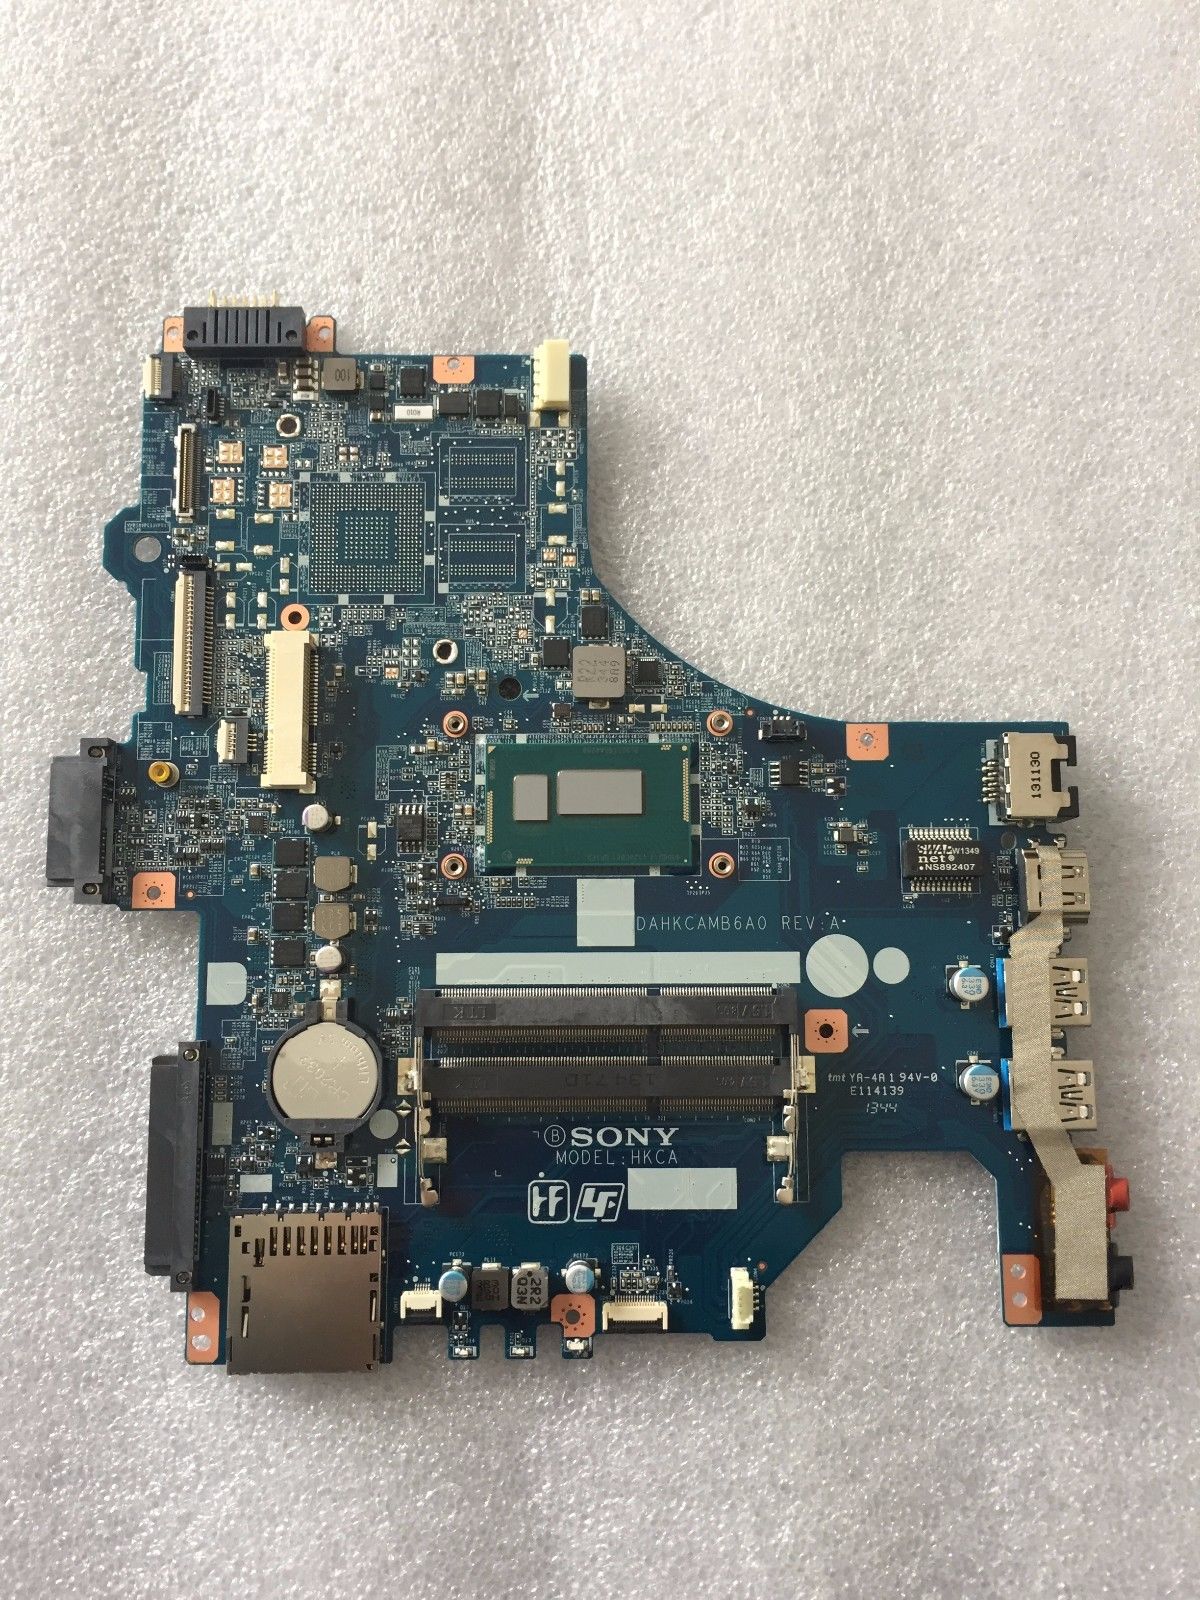 Genuine Sony Vaio SVF143 Pentium CPU Laptop Motherboard A2011586A DAHKCAMB6A0 - Click Image to Close